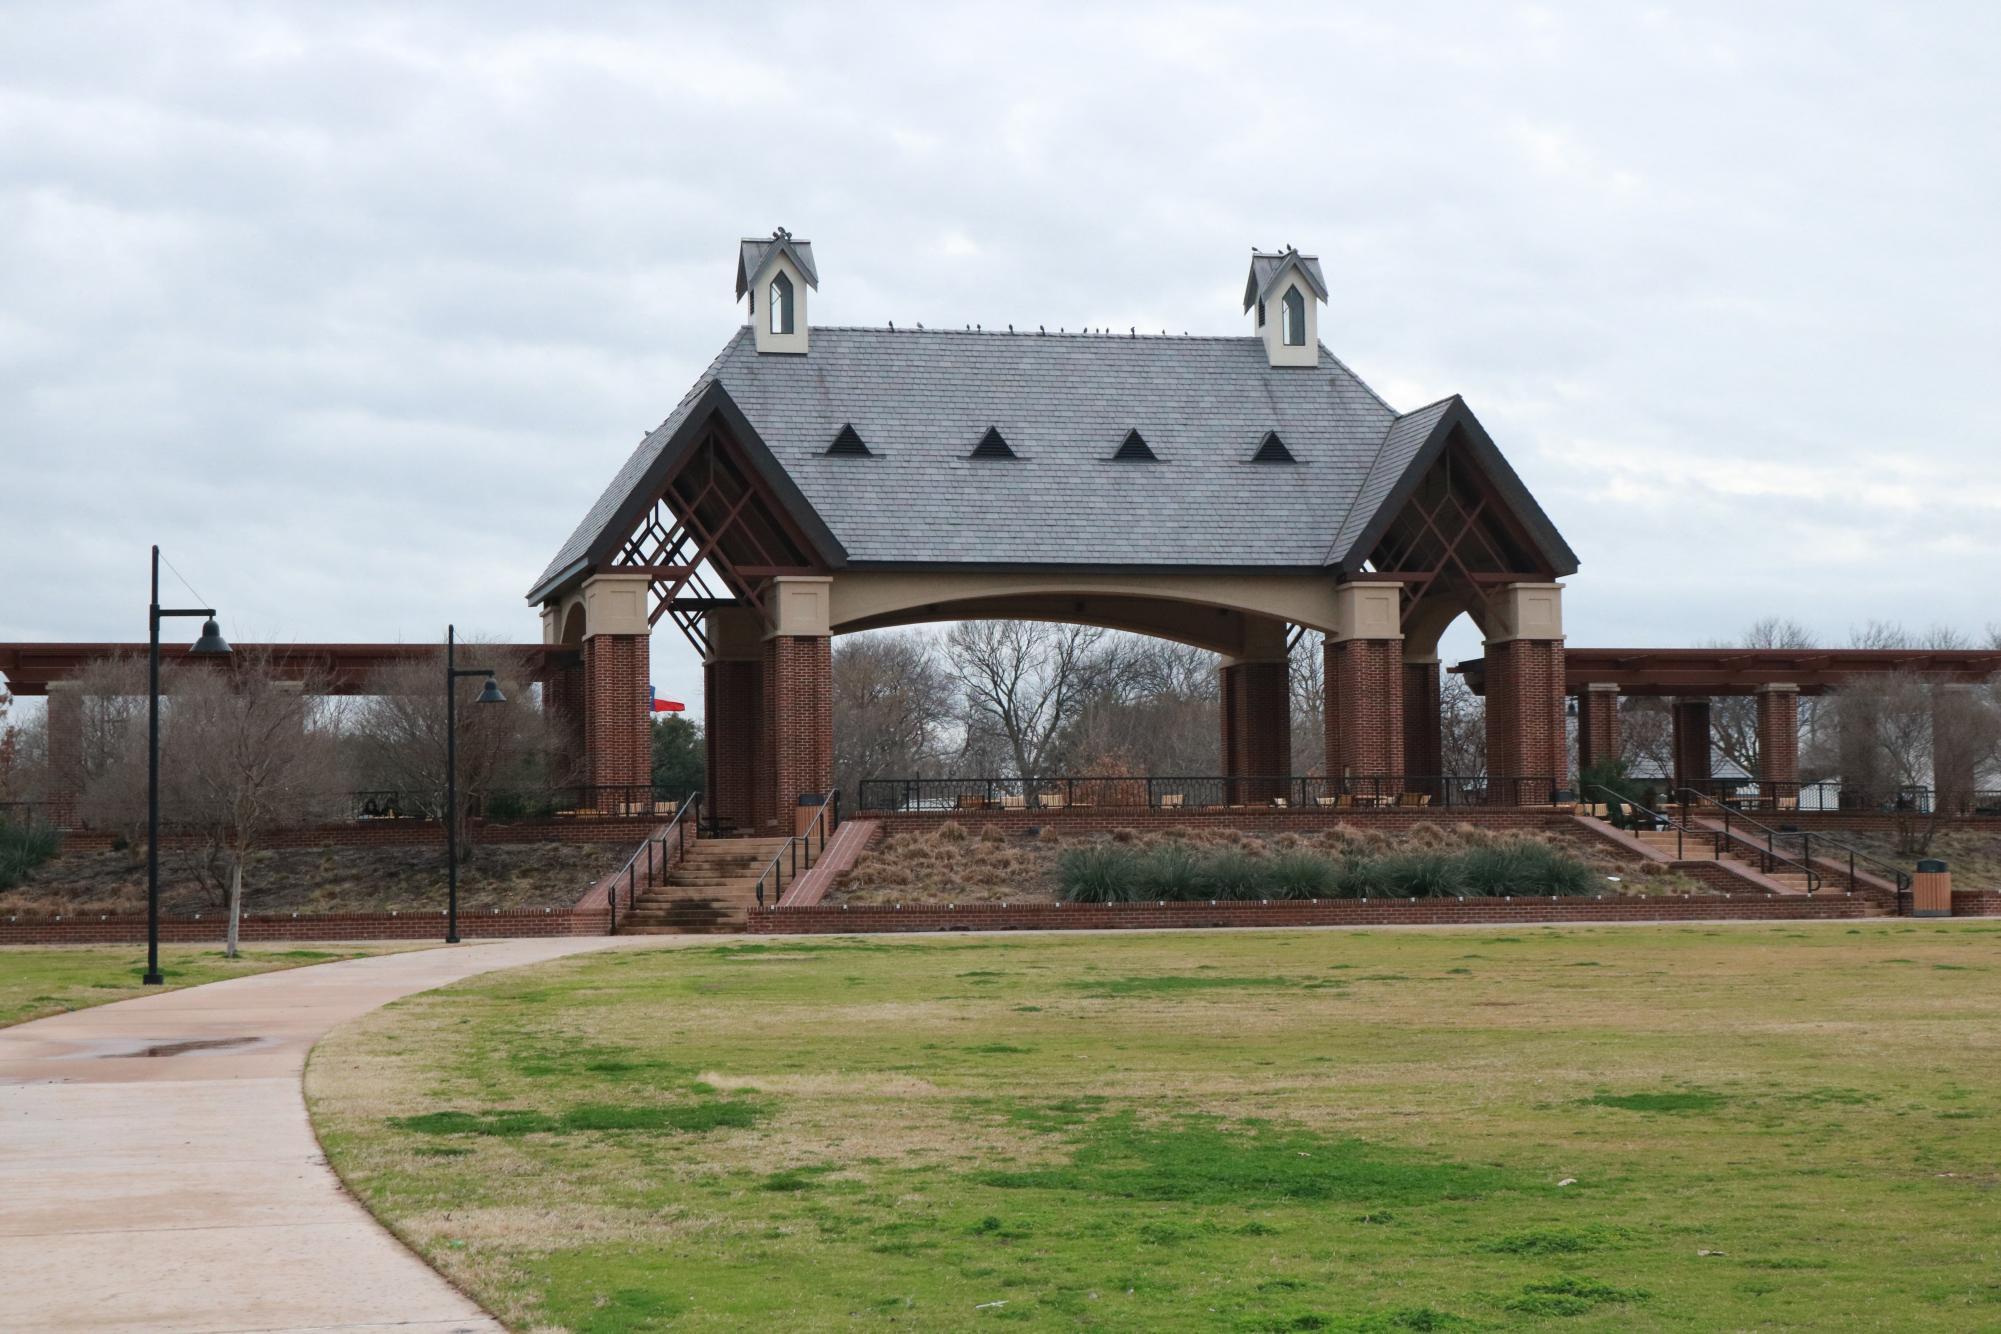 Andy Brown Park has spacious fields perfect for a Valentine’s Day picnic. The Sidekick news editor Sahasra Chakilam provides 10 date ideas for couples to enjoy together around Coppell. 